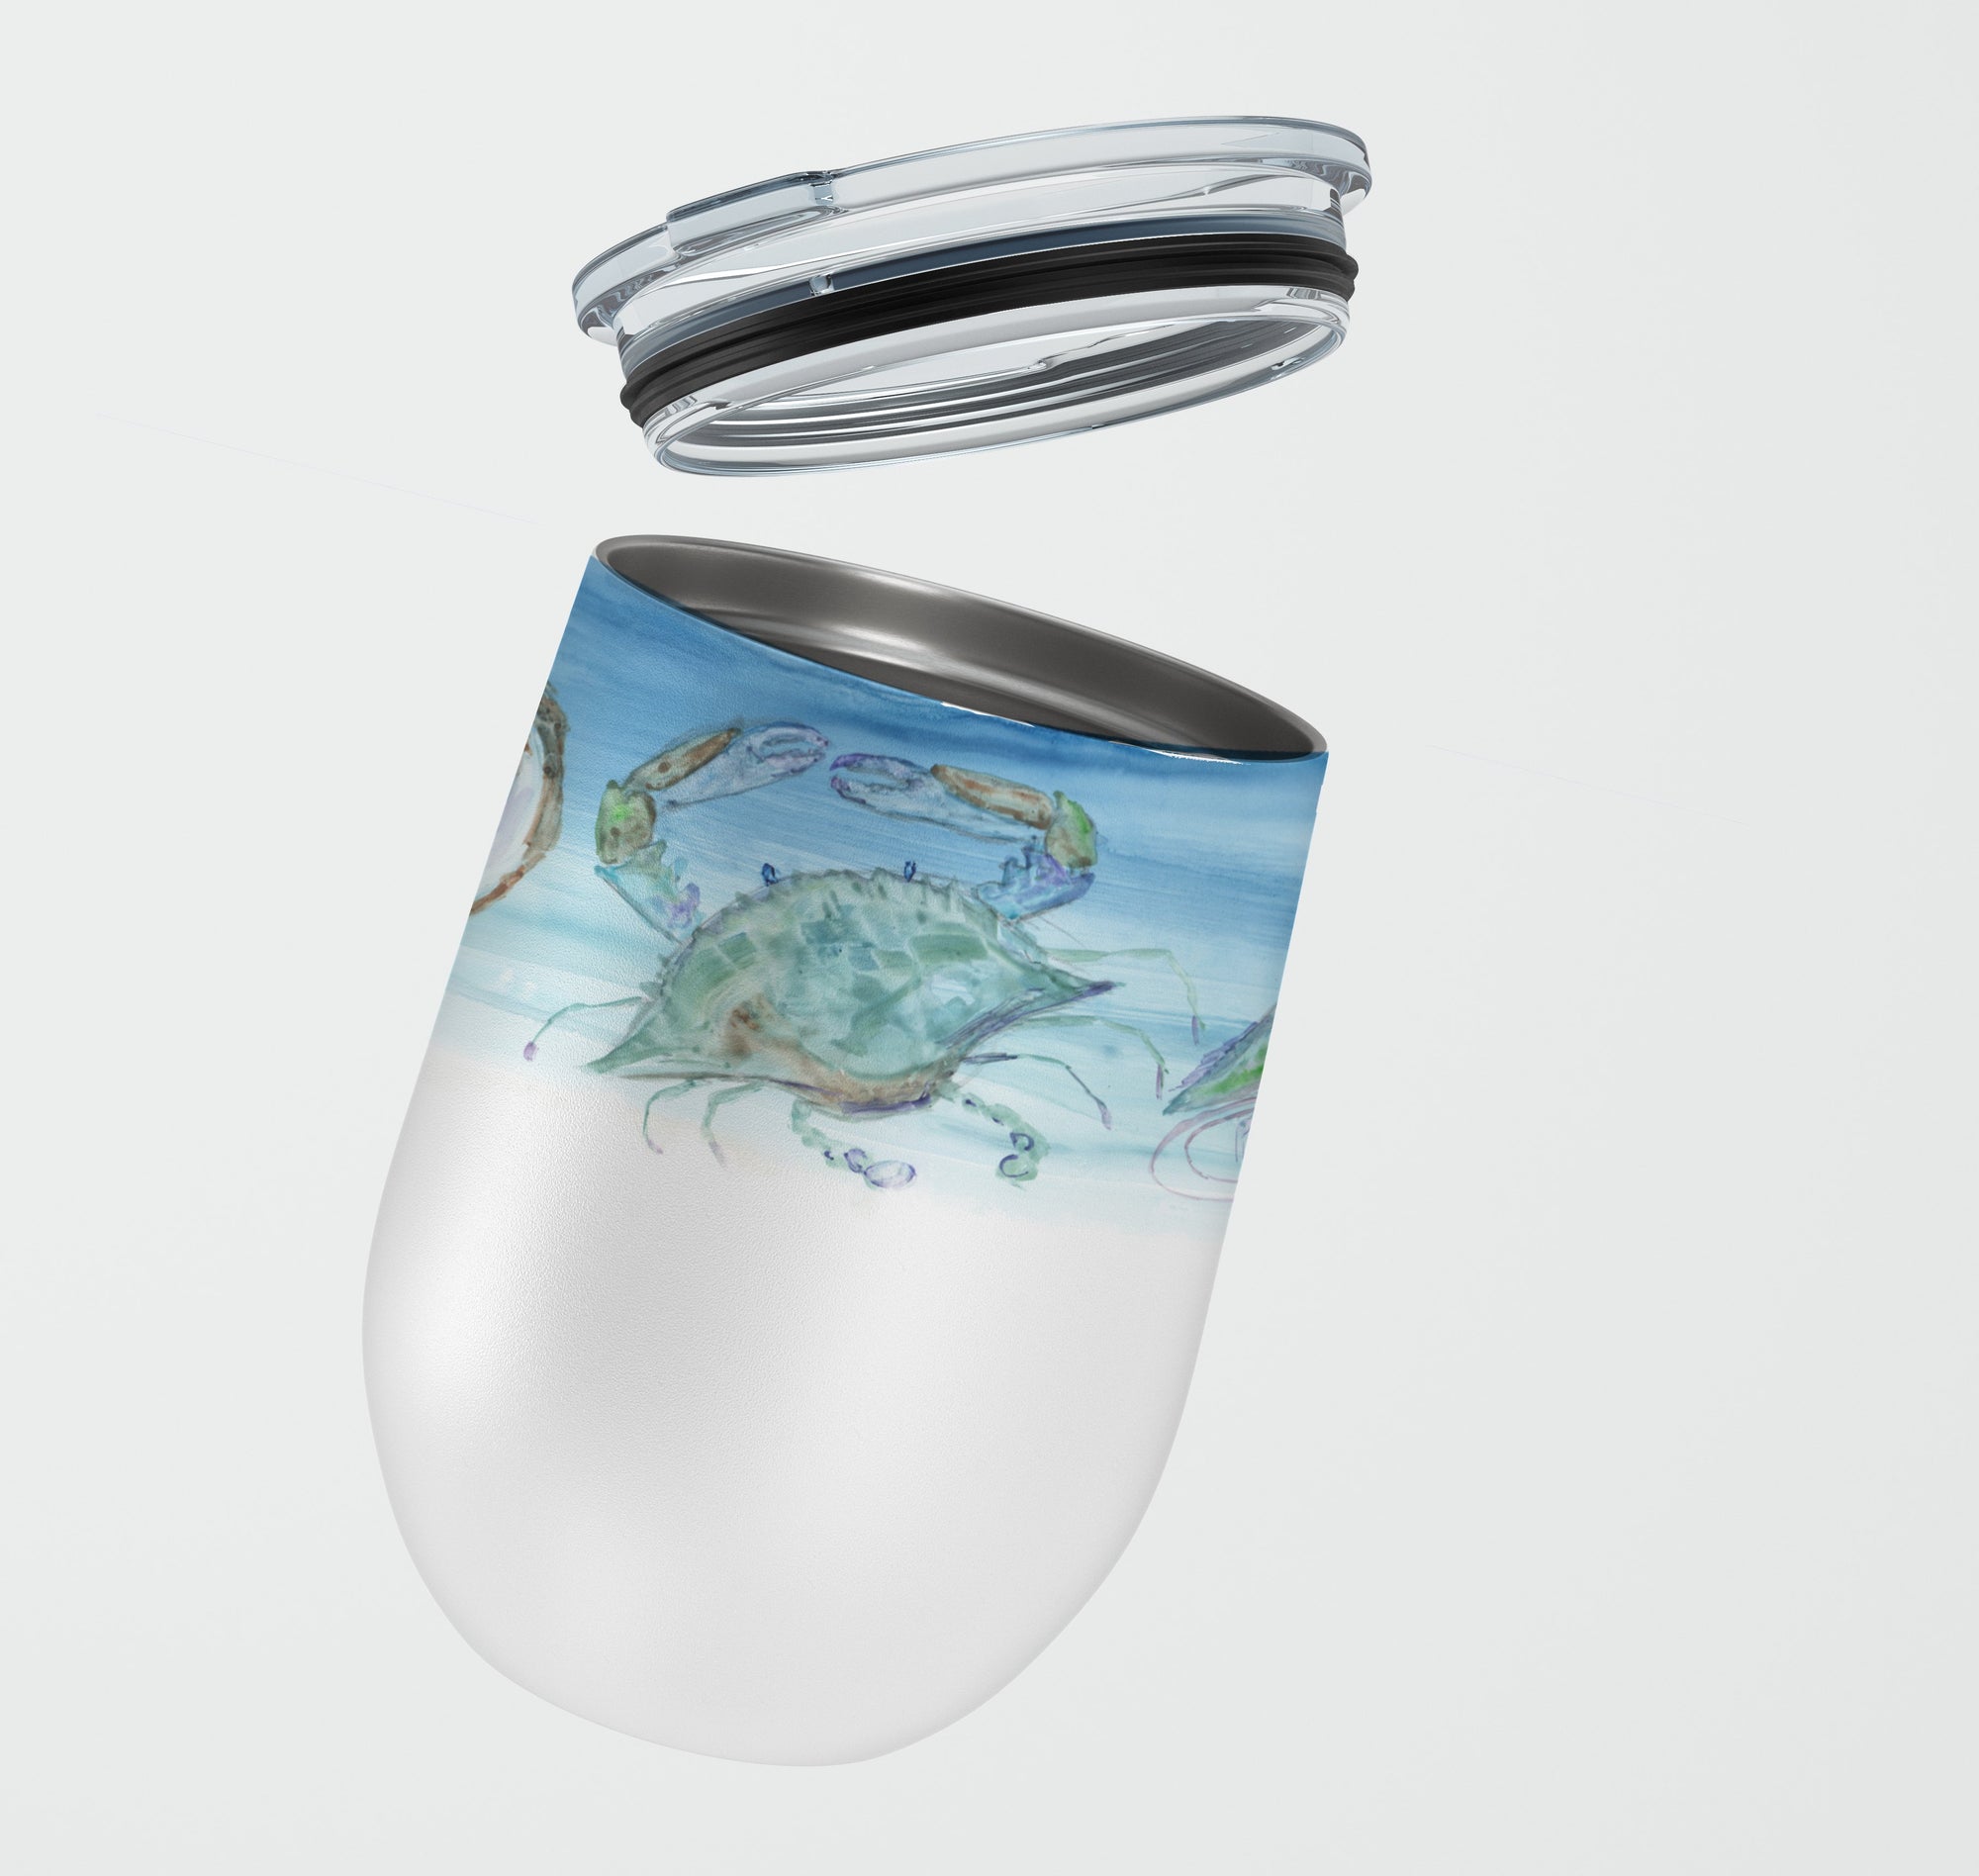 Buy this Crabs Shrimp and oysters Stainless Steel 12 oz Stemless Wine Glass